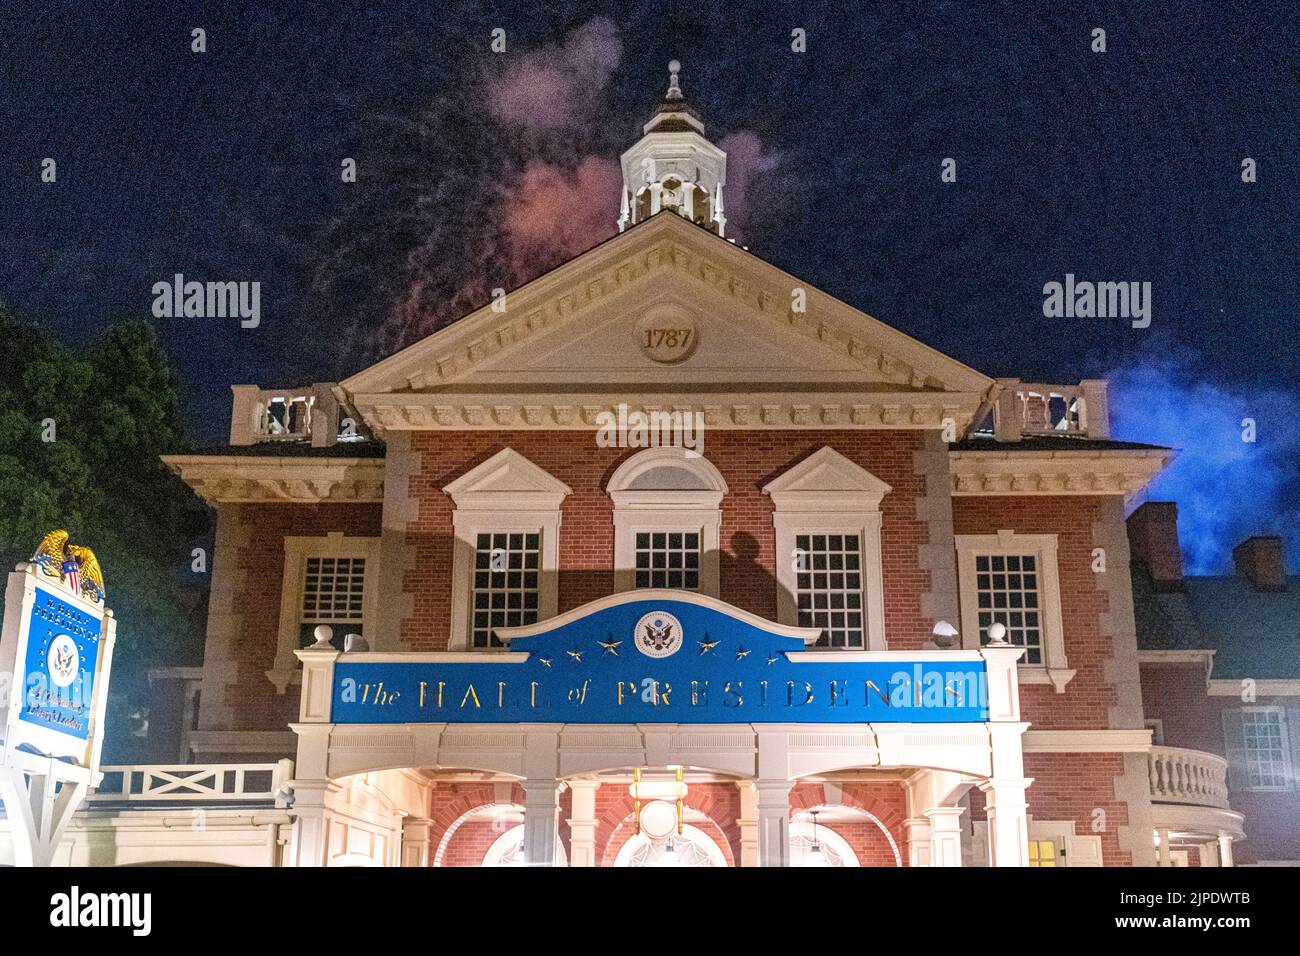 Night view of the Hall of Presidents building. Stock Photo